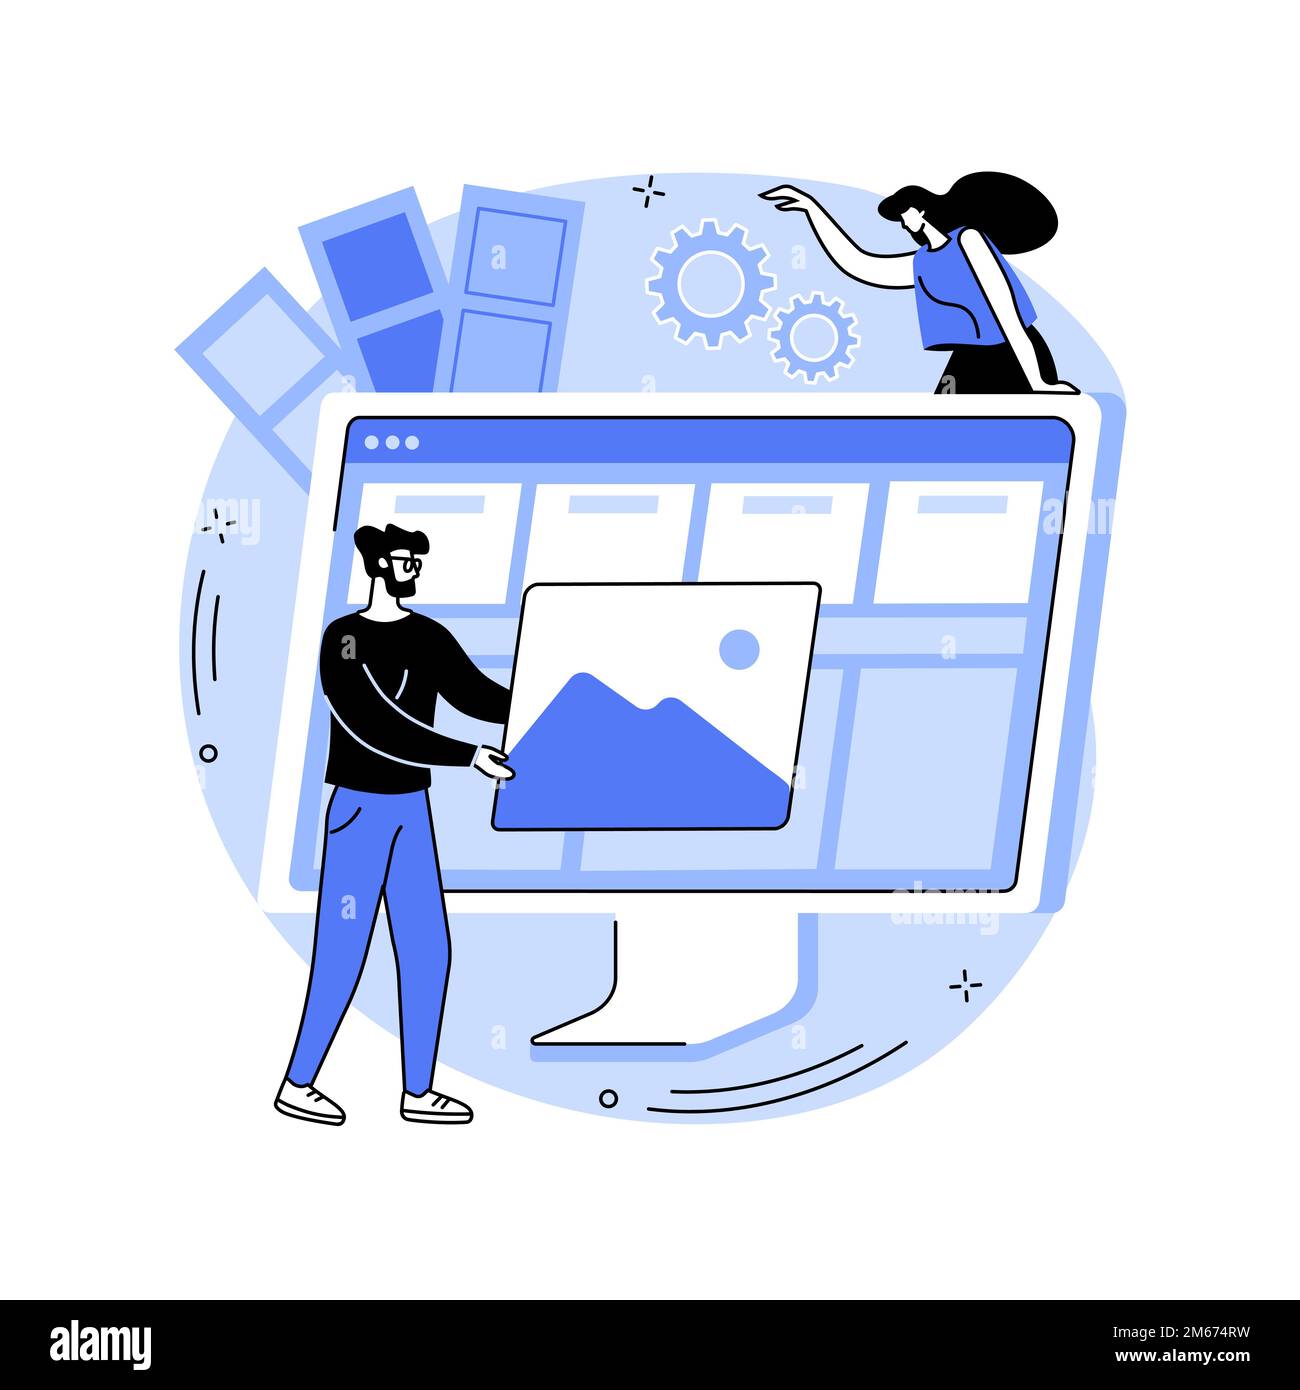 Interface design abstract concept vector illustration. User interface engineering, visual element, create website and application, responsive design, Stock Vector